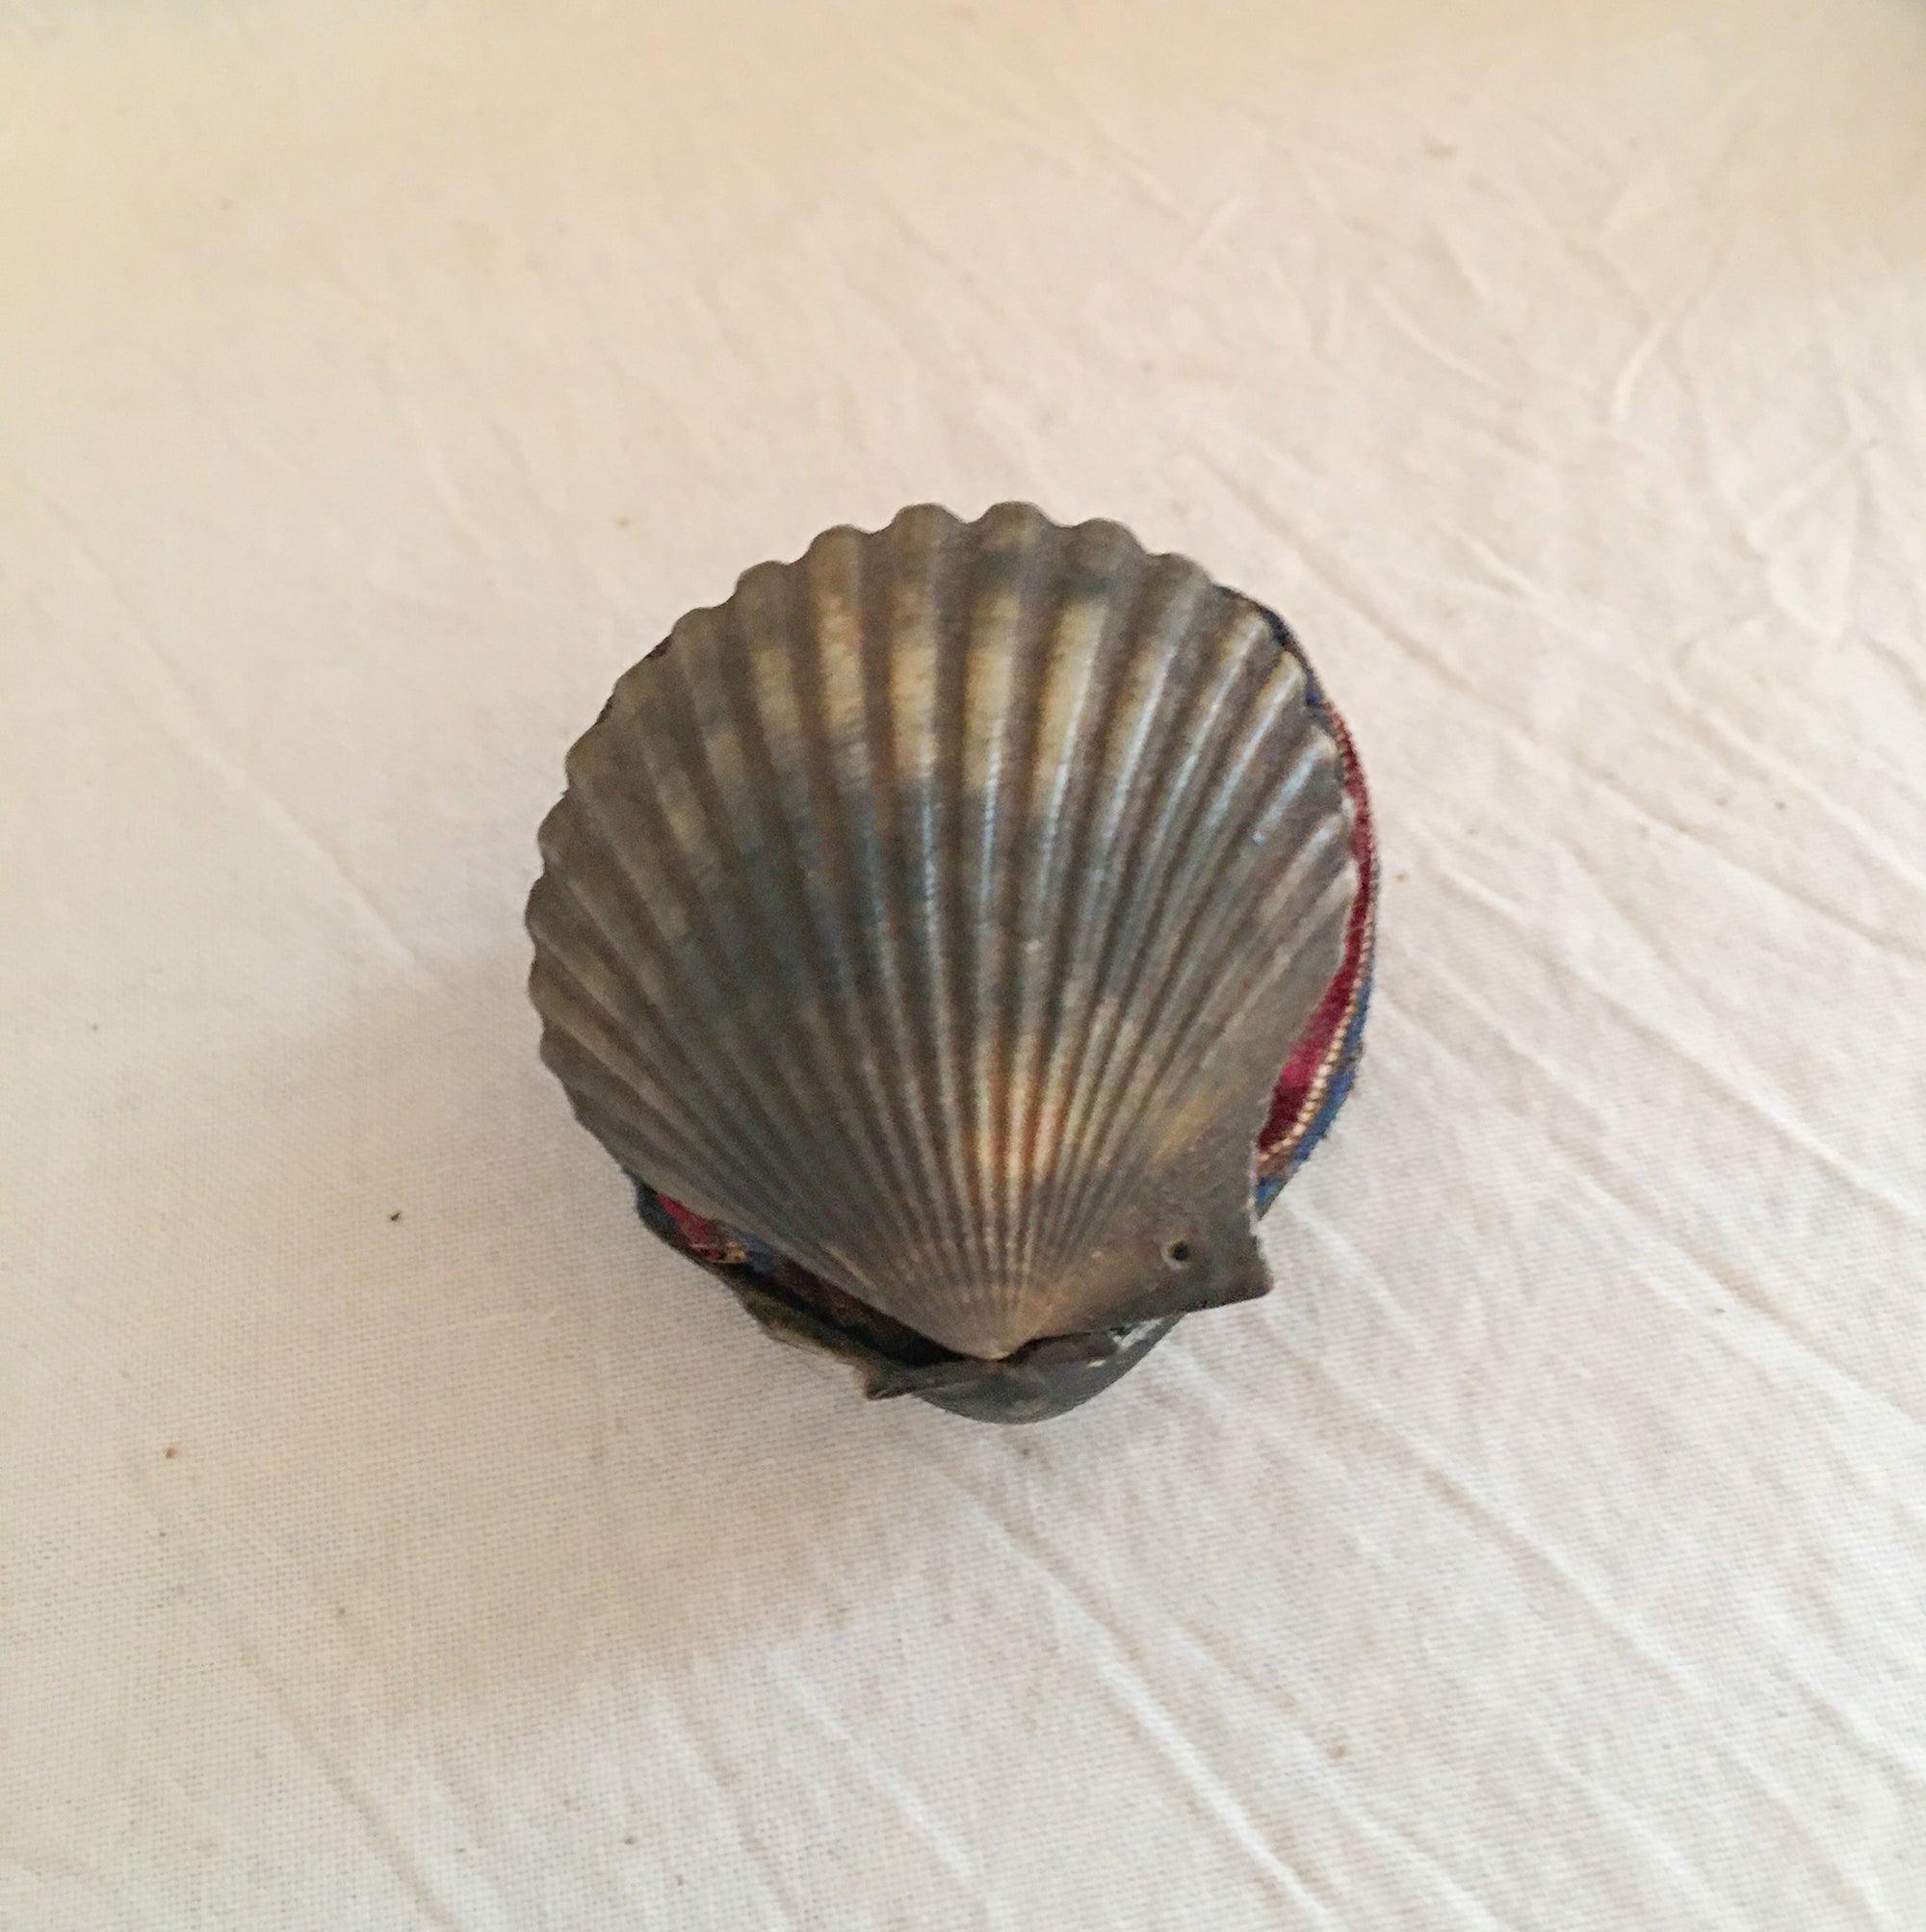 Earlyl Pin Cushion, Scallop Shell with Velvet